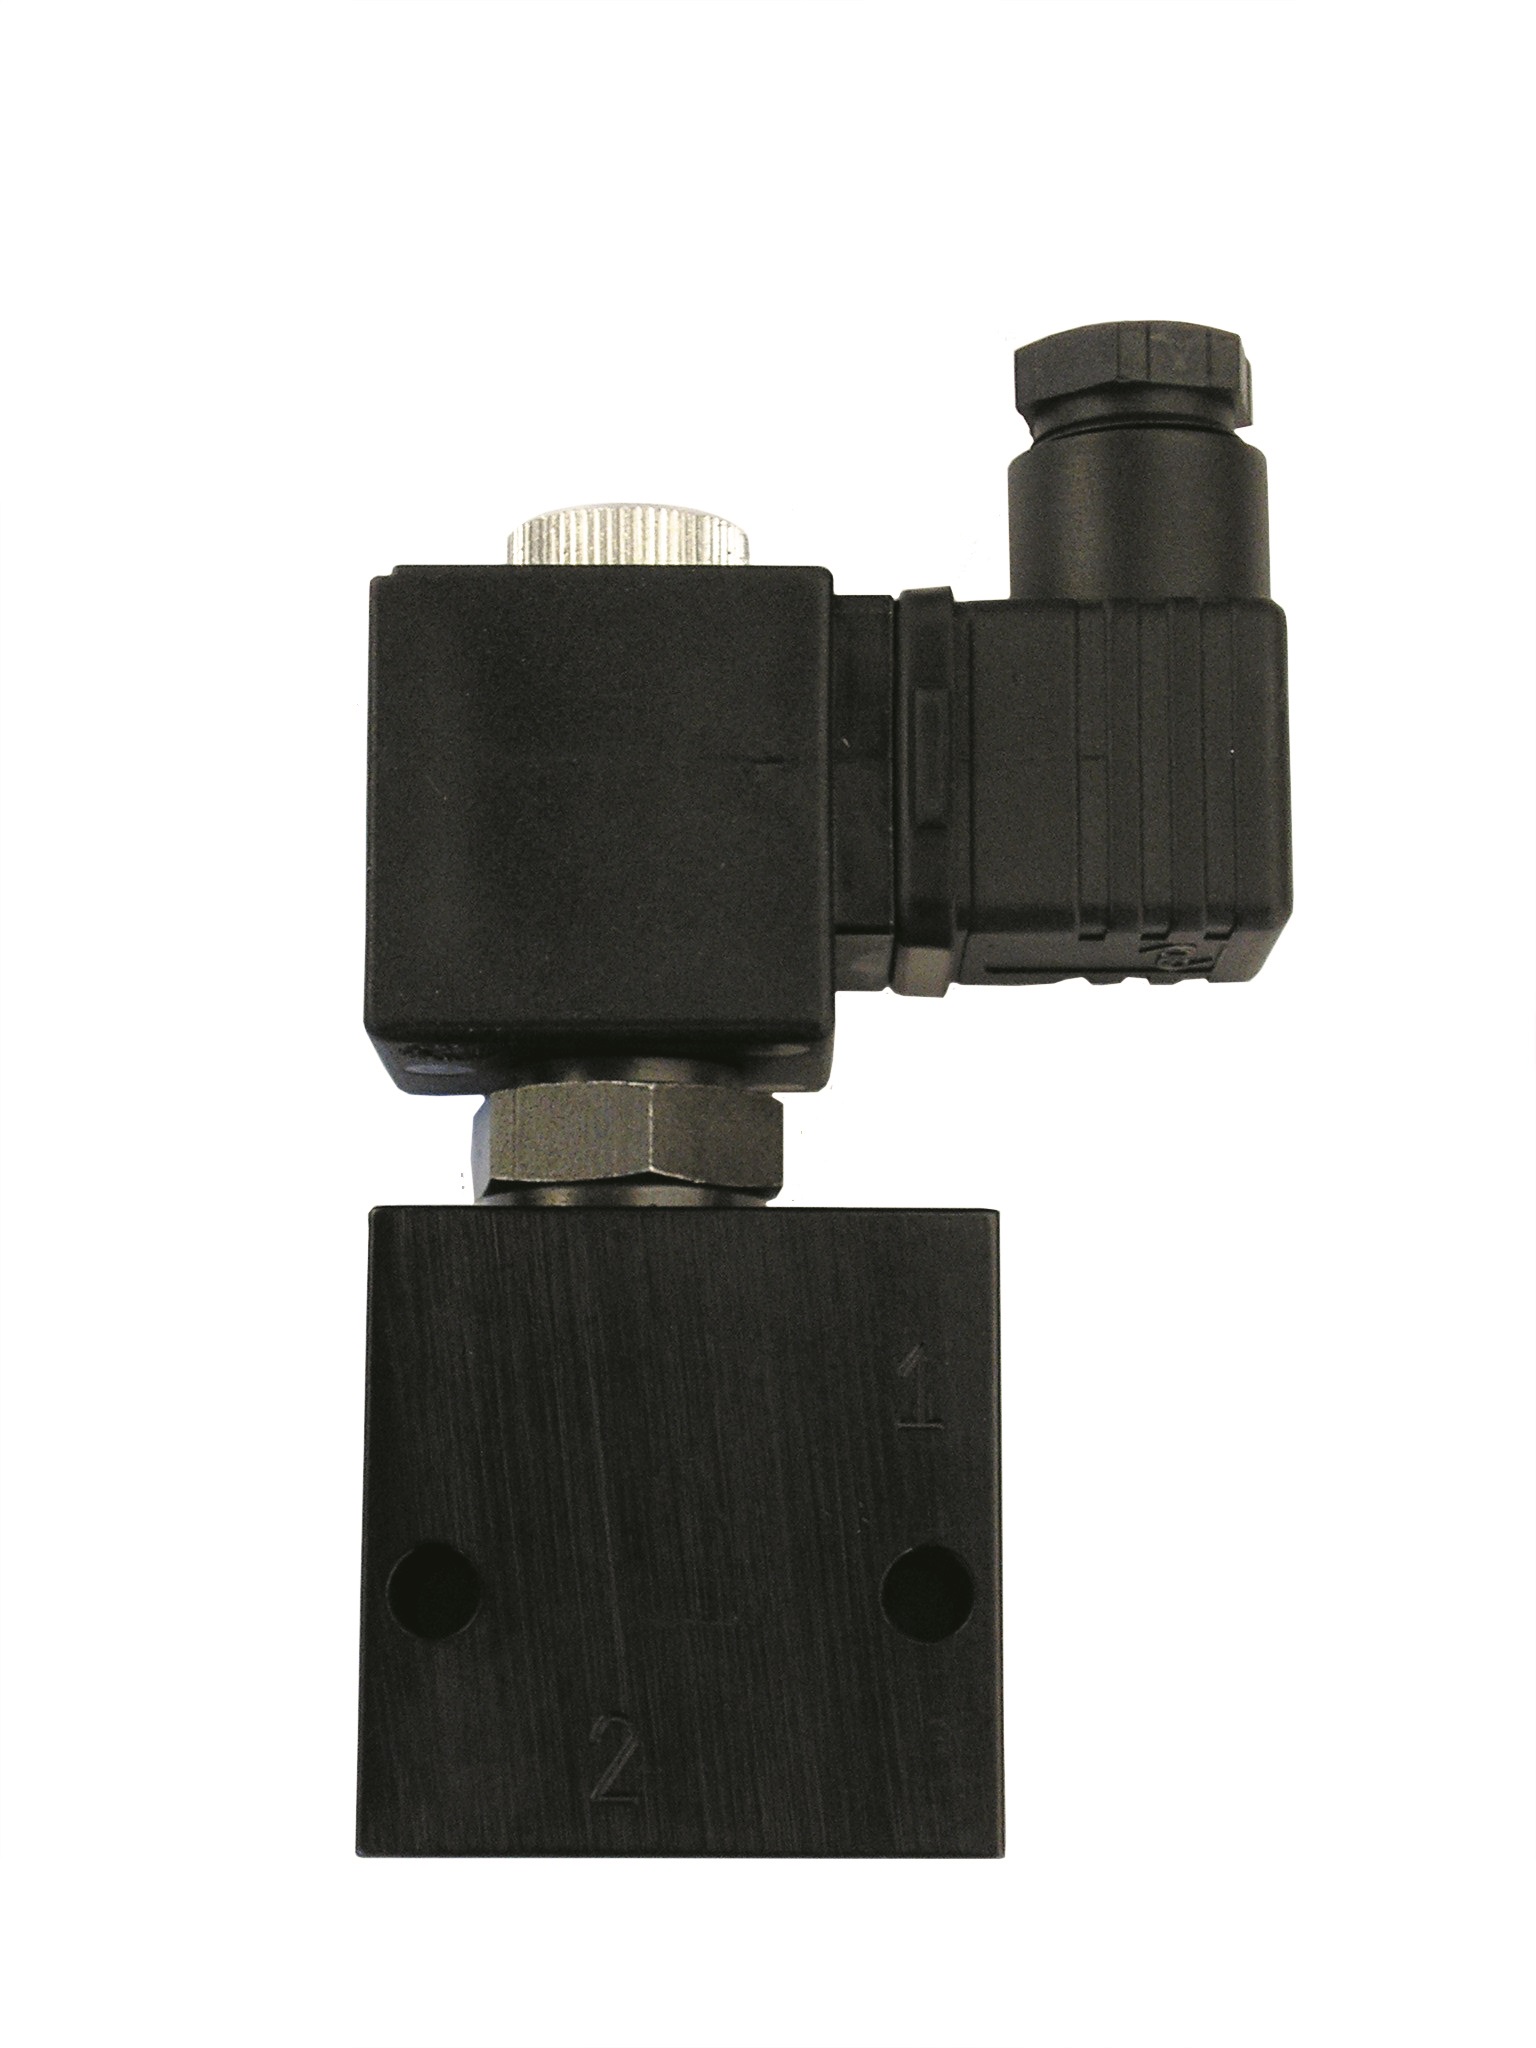 2 Way 2/2 Poppet Type Solenoid Valve, Closed with Manual Override, 12 VDC 1/4" BSP